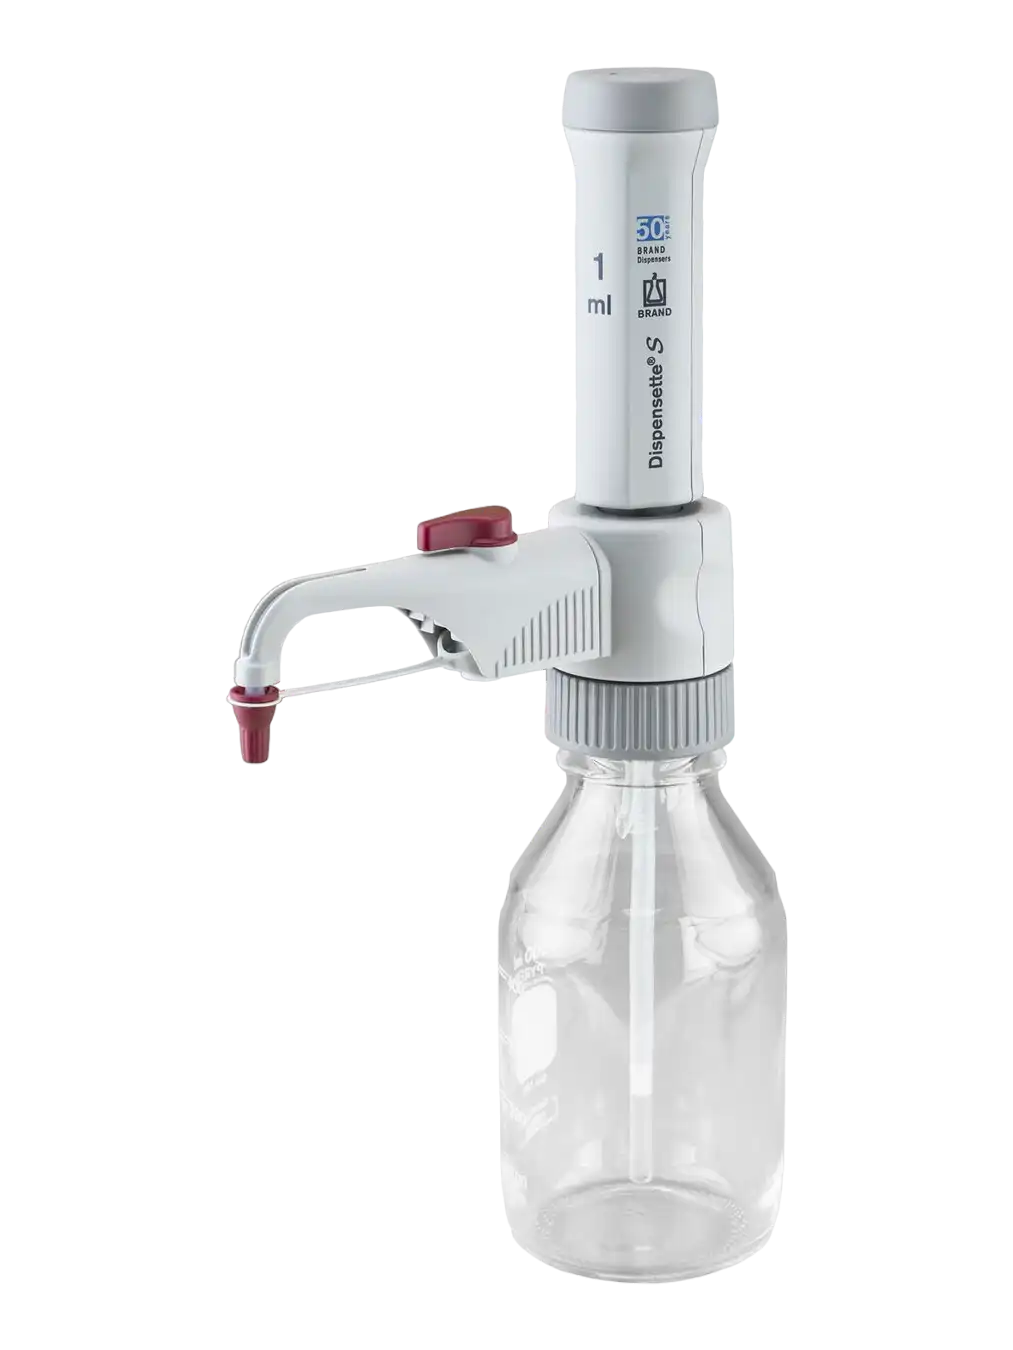 Bottle-Top Dispenser, Dispensette® S, With Recirculation Valve 1 ml Fixed Volume, 0,006 ml Accuracy